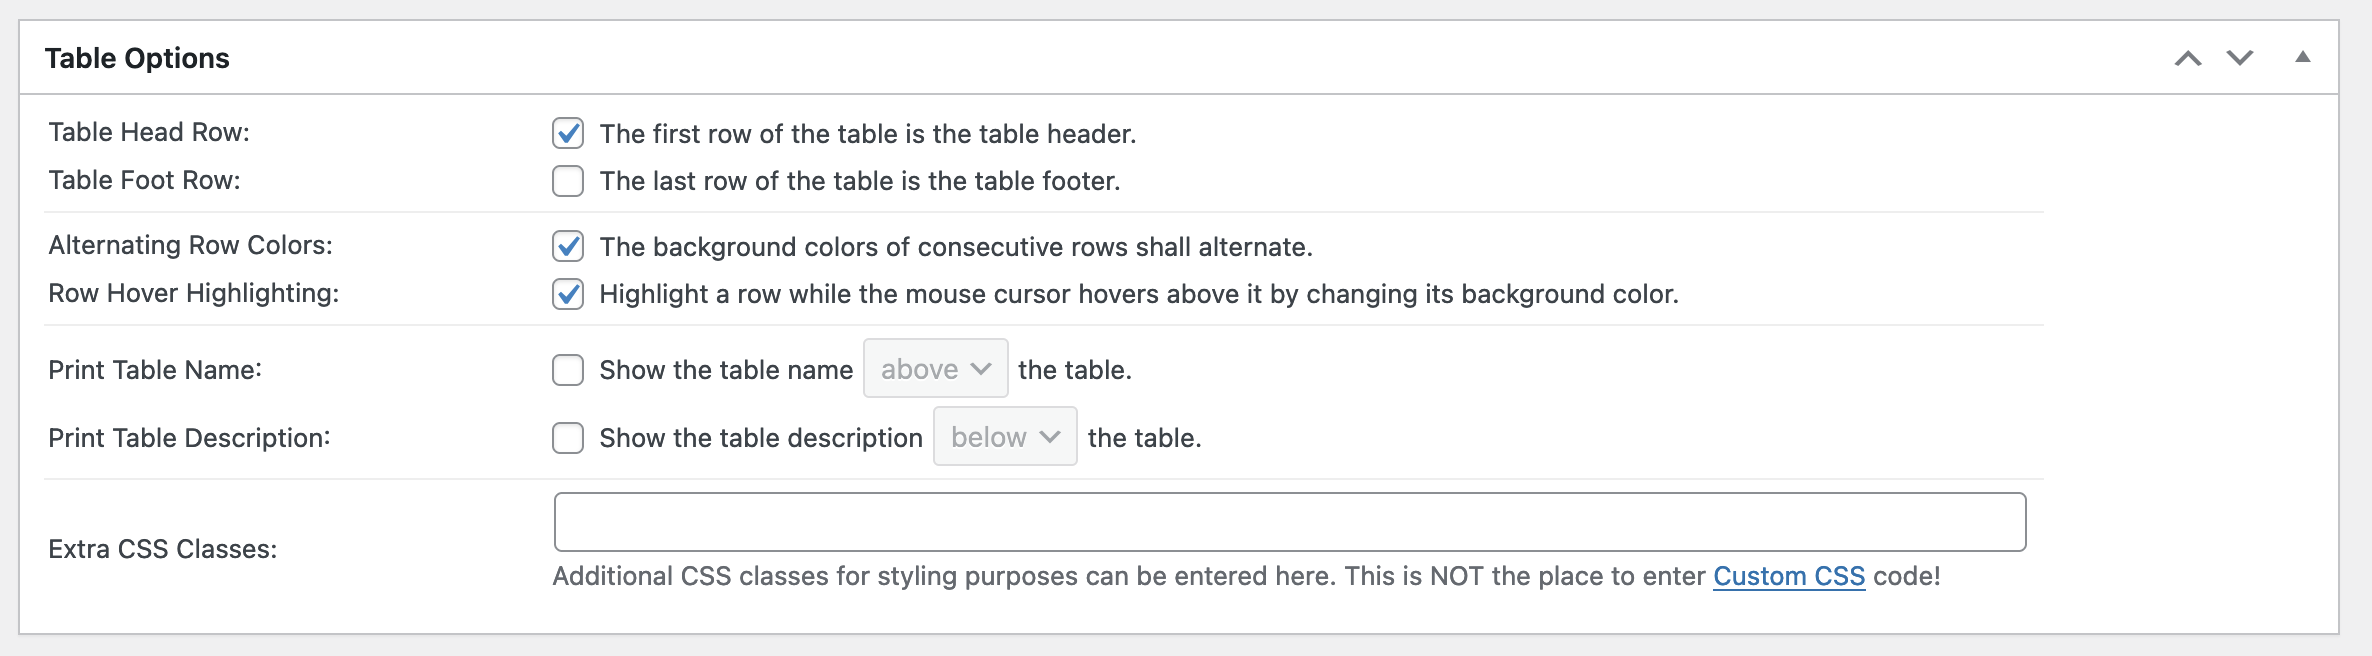 Table Options in TablePress.